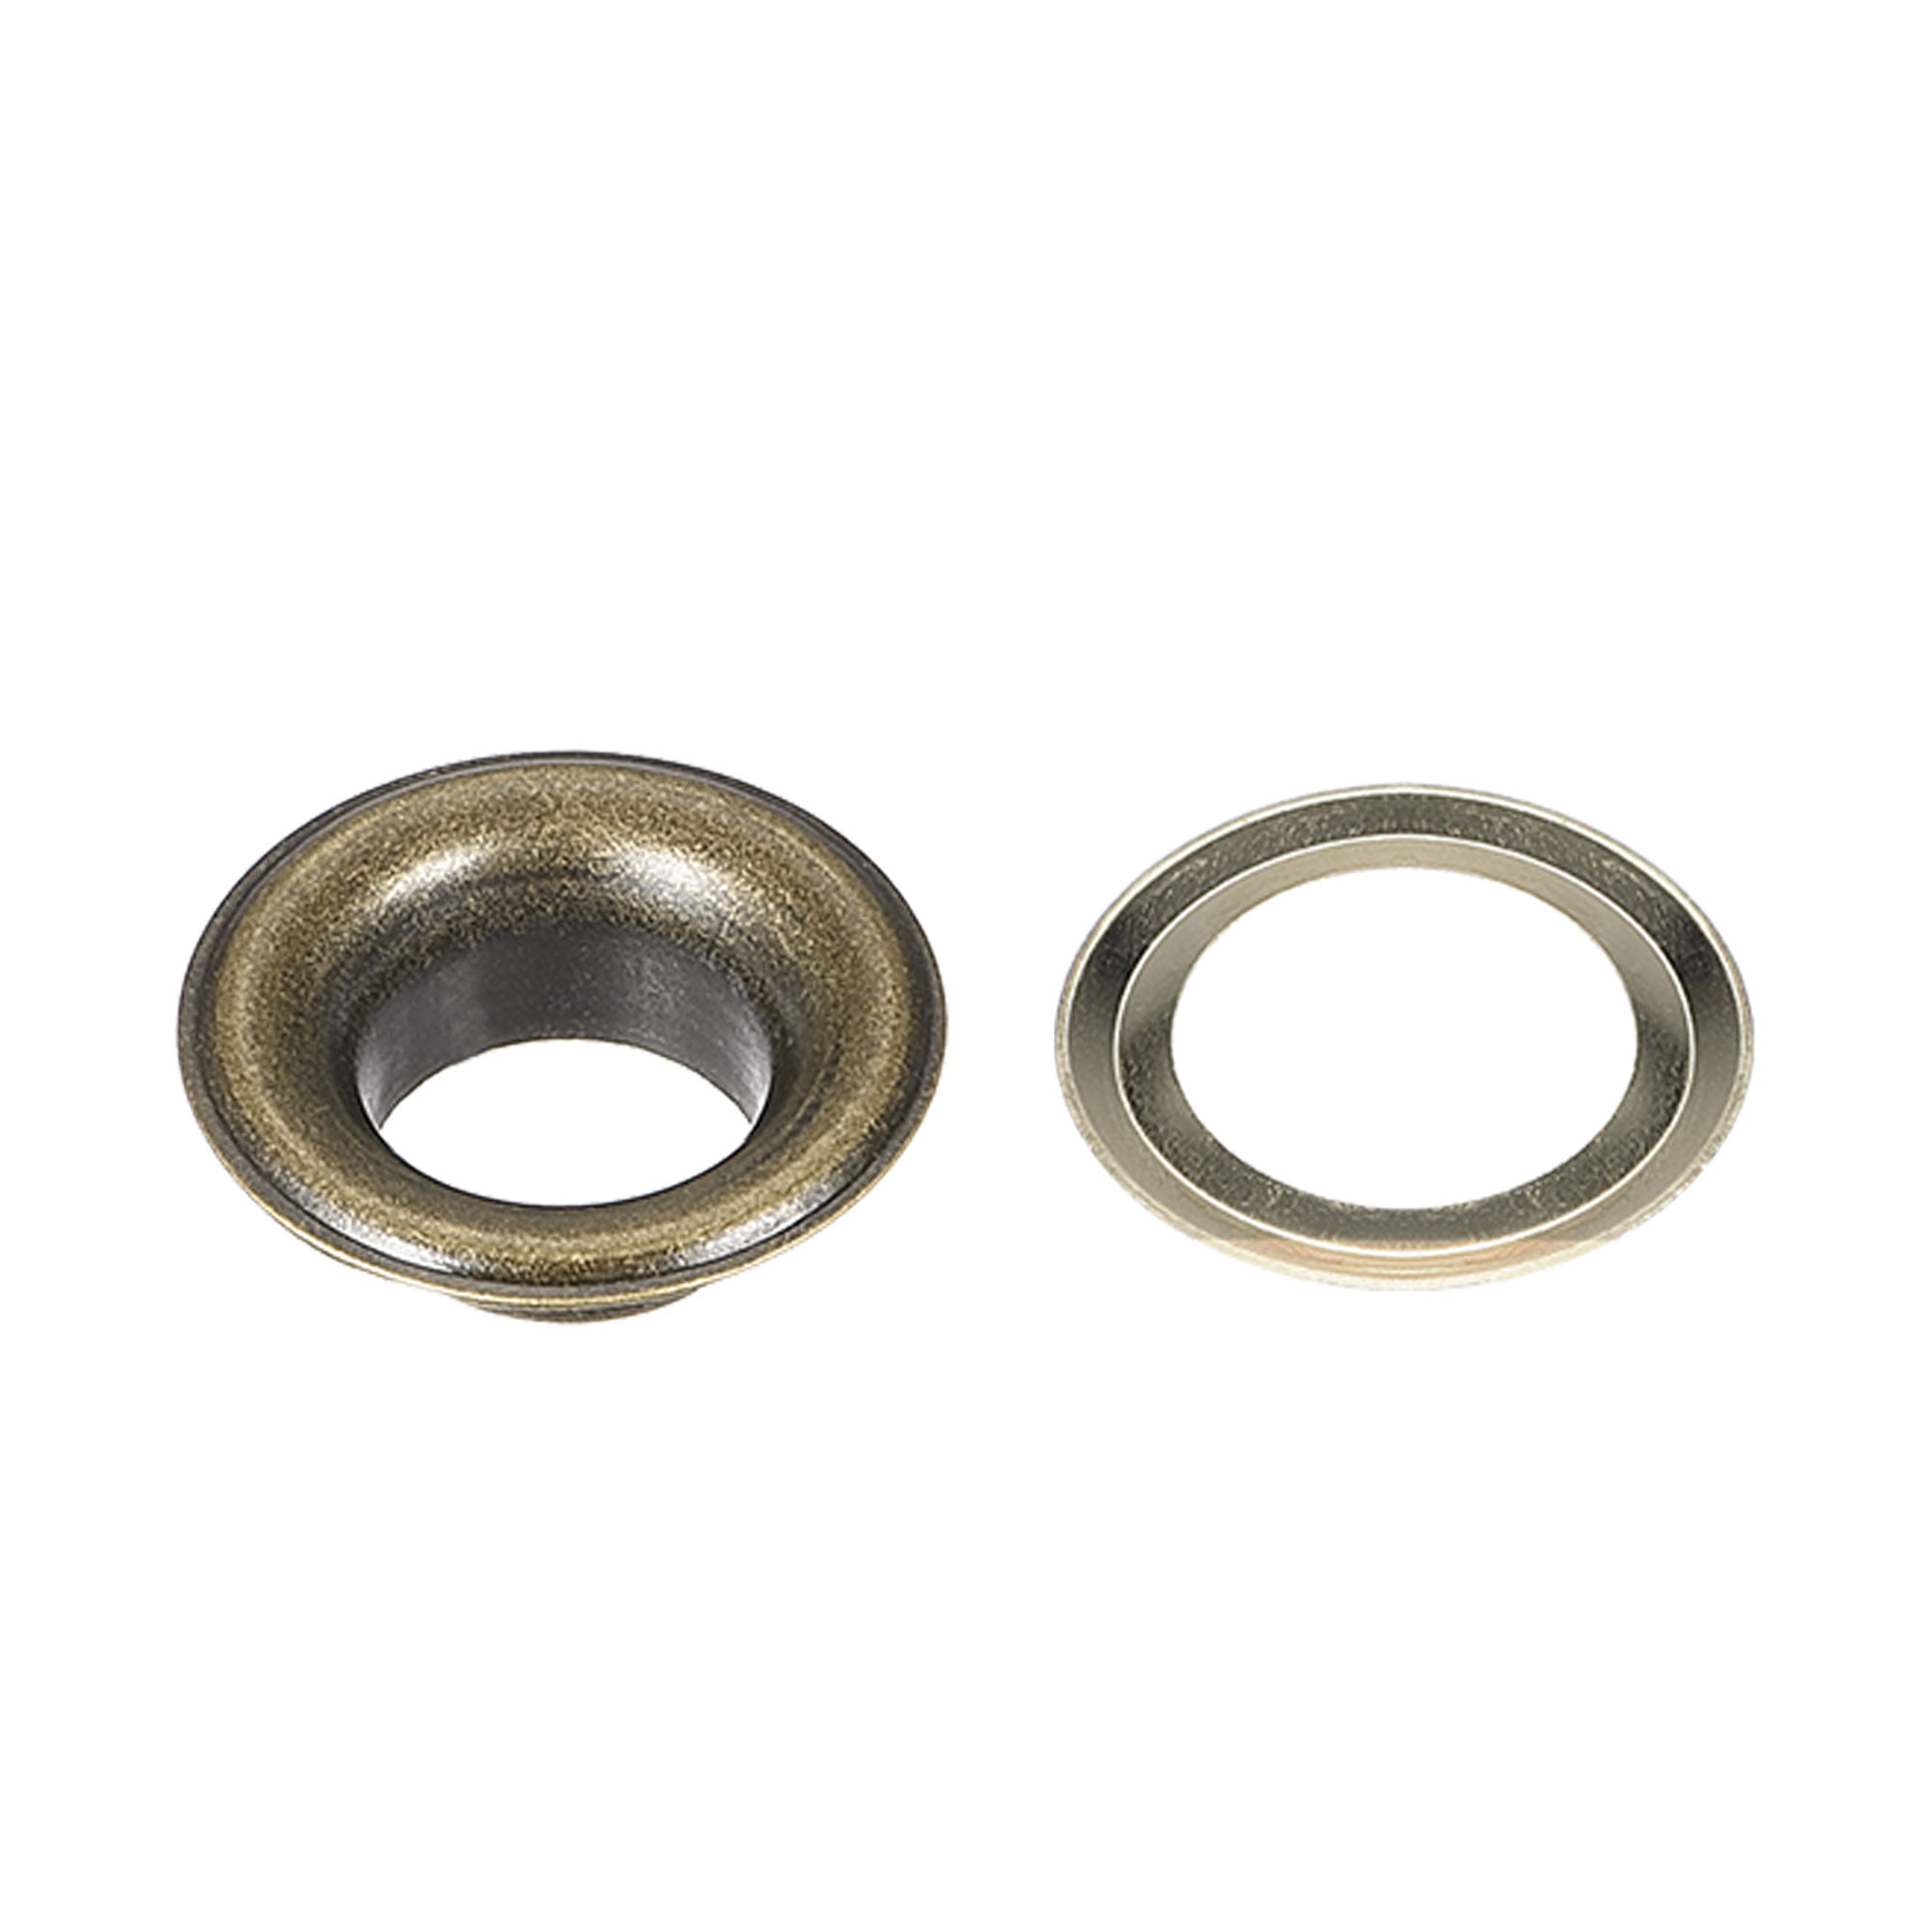 Bronze Metal Eyelets , 20set Eyelets Grommets With Washers, 13mm